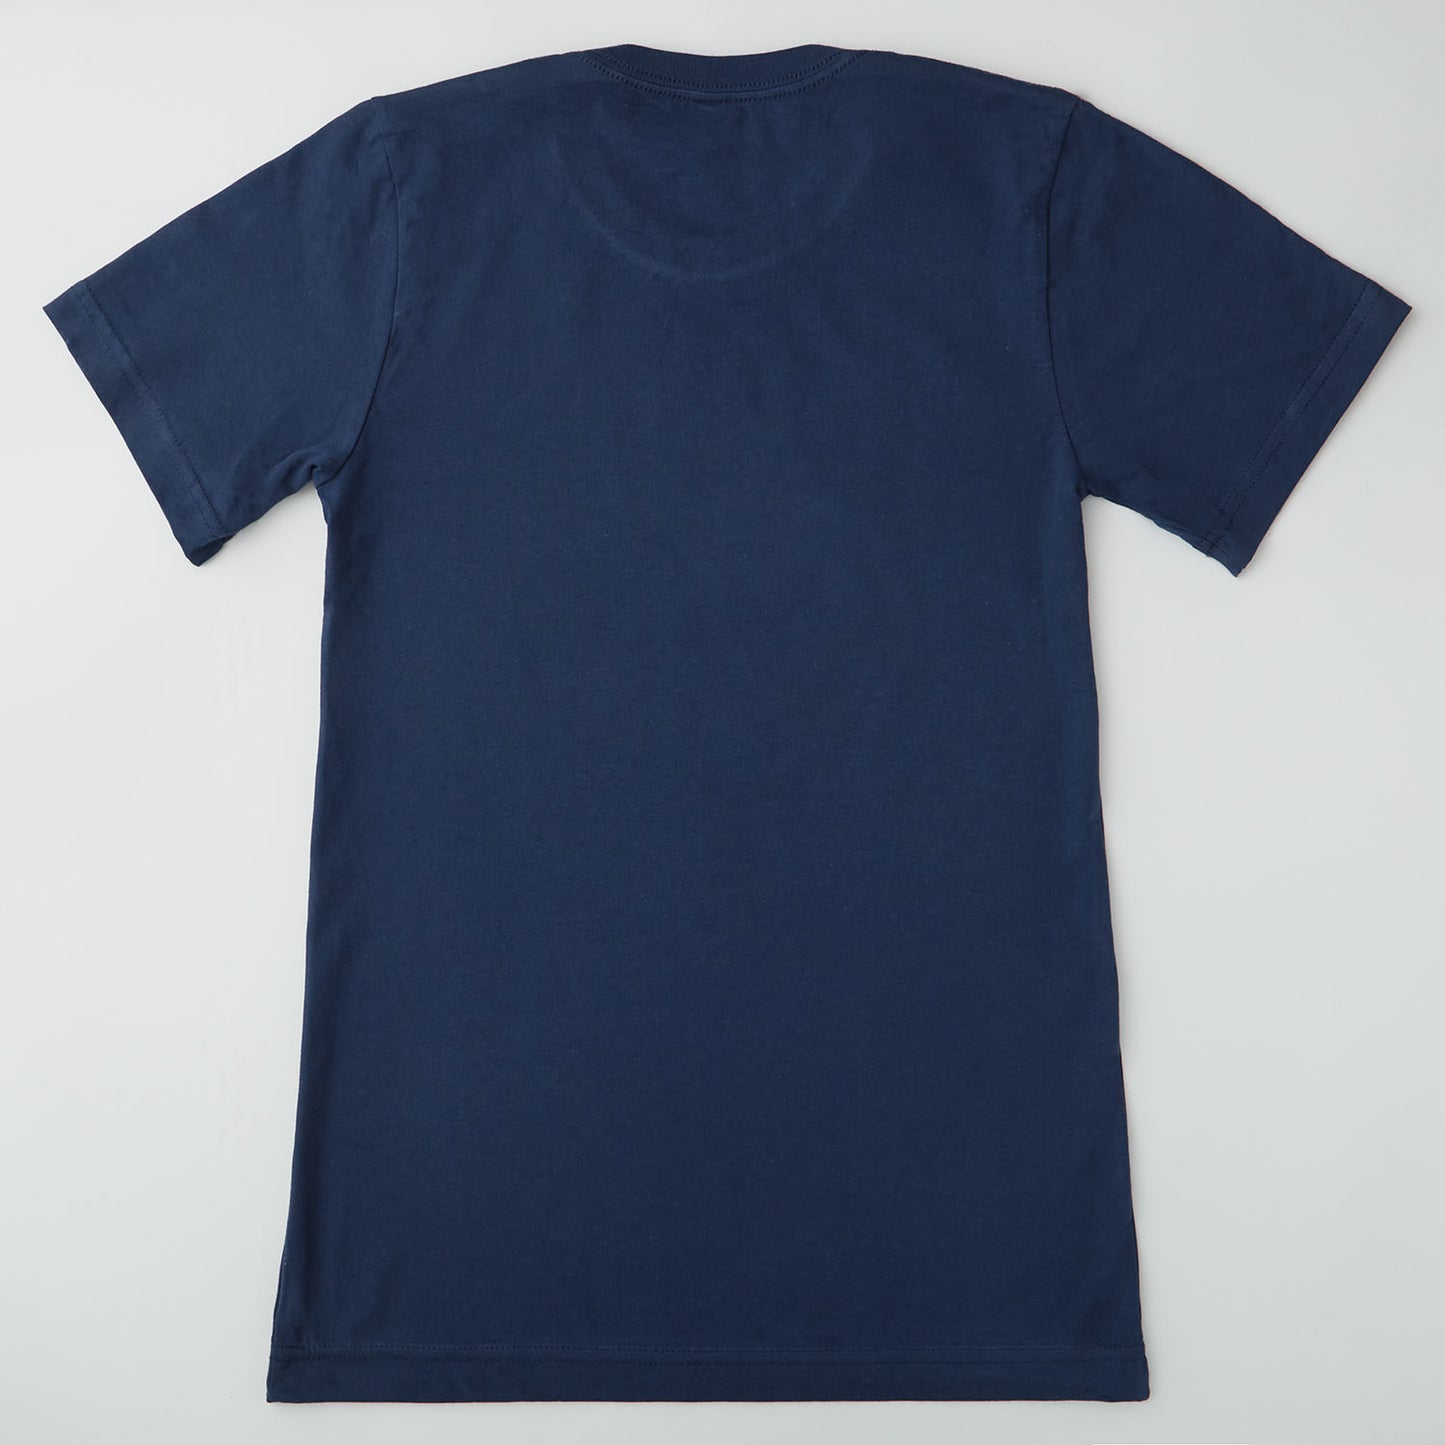 Scrappy & Bright Navy (Christmas in July) T-shirt - XL Alternative View #1